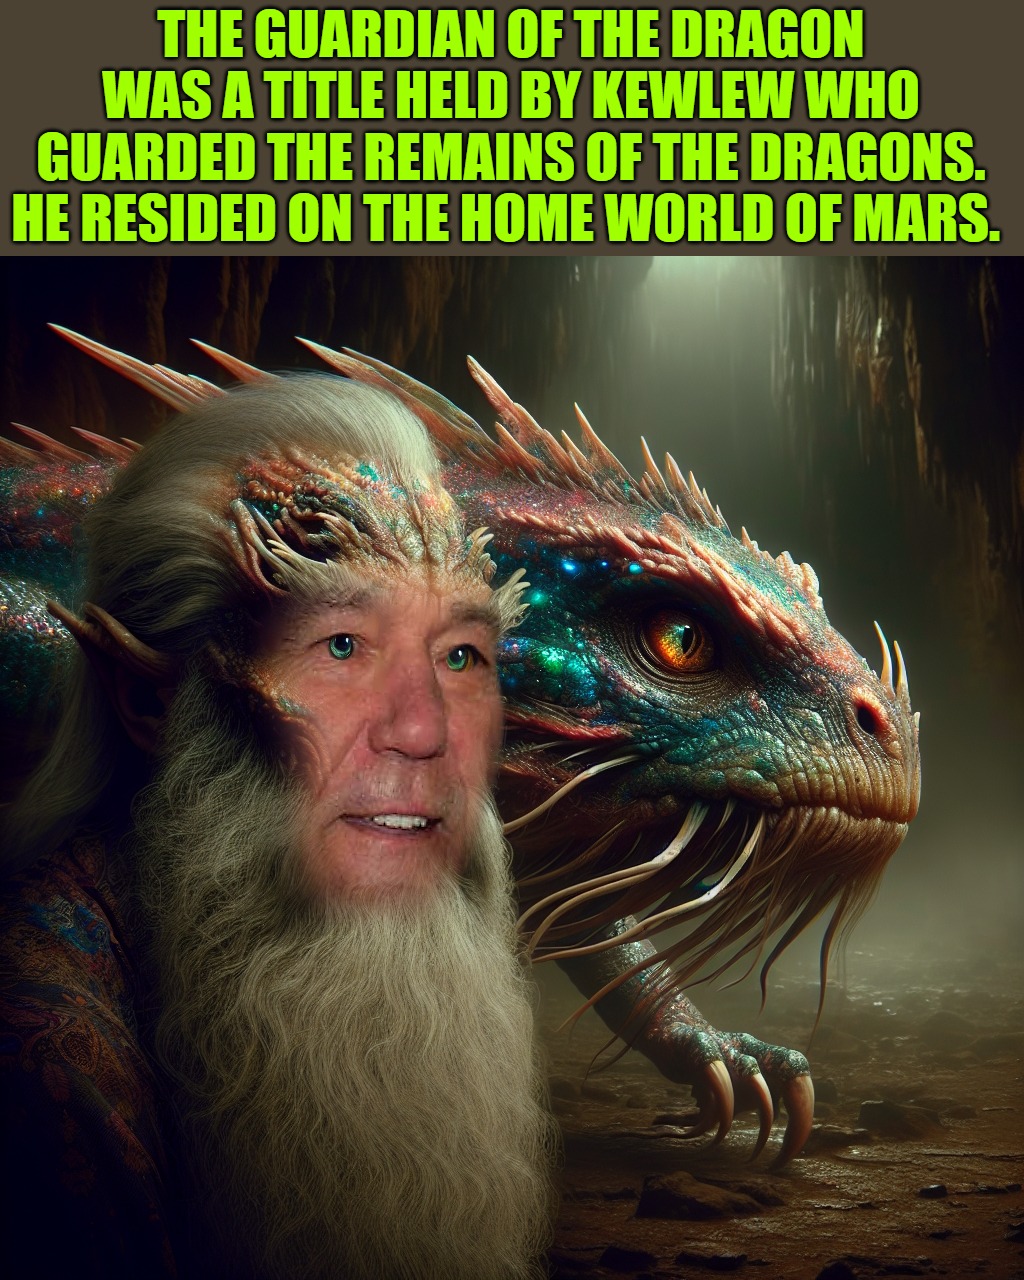 The Guardian of the Dragons | THE GUARDIAN OF THE DRAGON WAS A TITLE HELD BY KEWLEW WHO GUARDED THE REMAINS OF THE DRAGONS.
HE RESIDED ON THE HOME WORLD OF MARS. | image tagged in dragons,kewlew | made w/ Imgflip meme maker